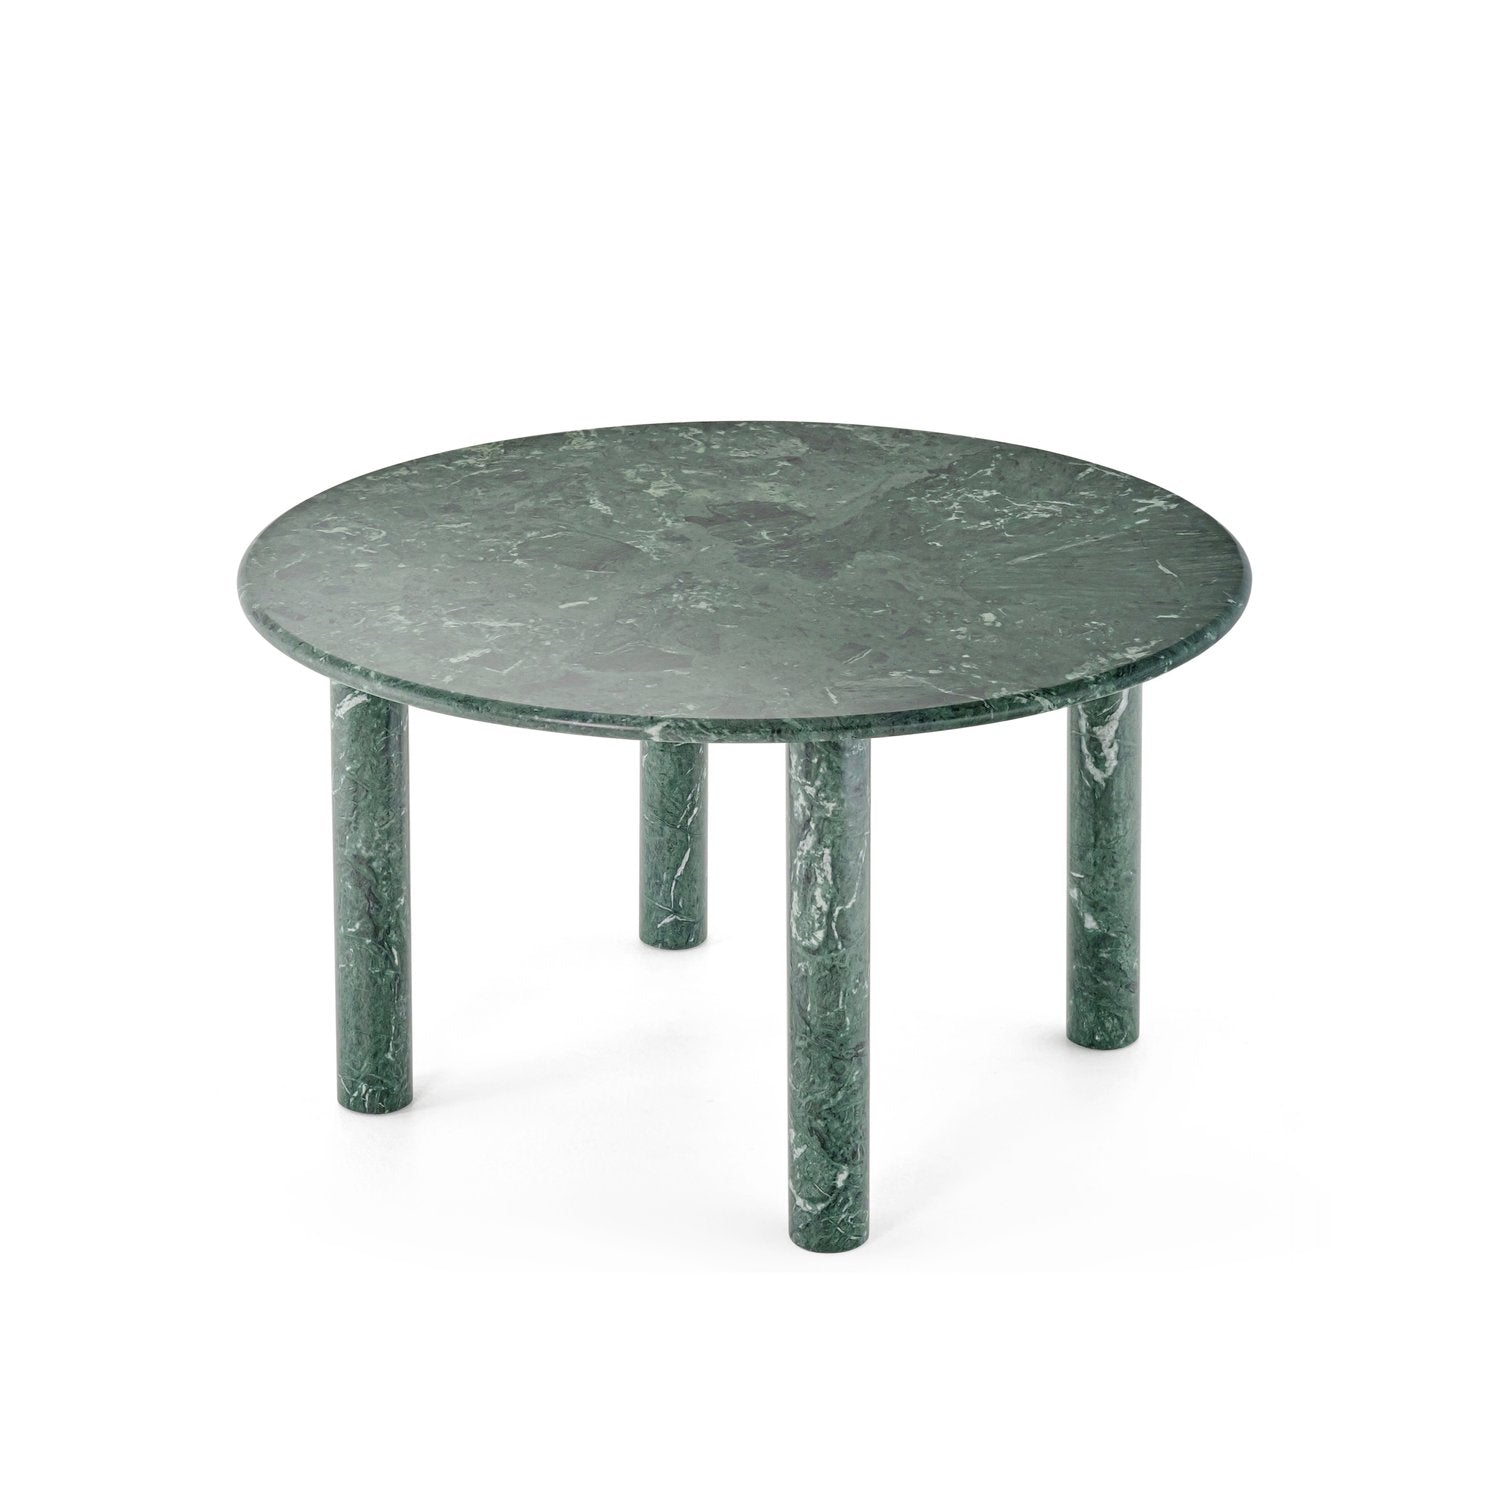 Dining Table PAUL limited edition - UKRAINIAN PRODUCT DESIGN